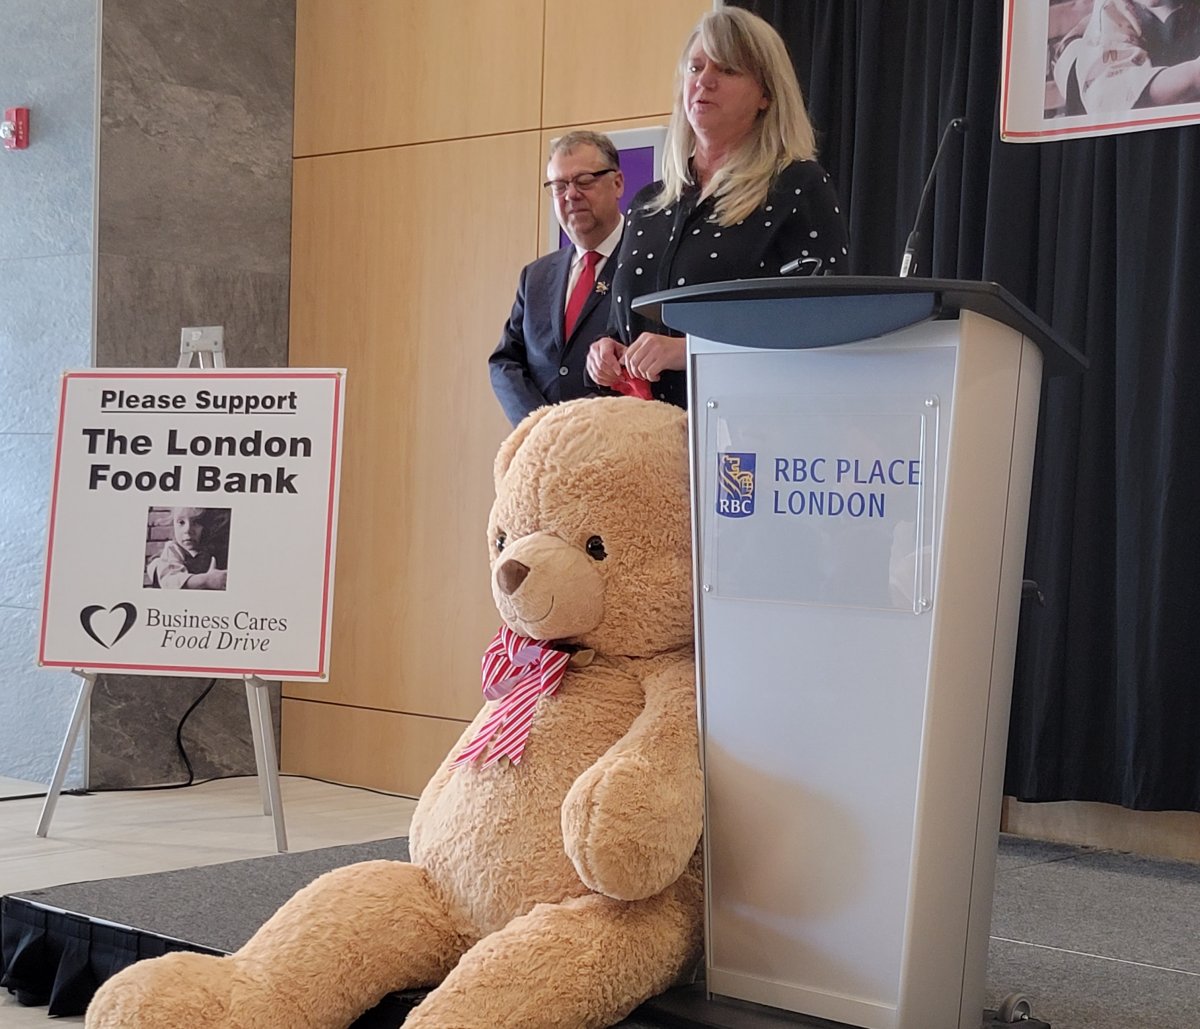 The 2021 edition of the Business Cares Food Drive in London, Ont., kicked off at RBC Place on Dec. 1, 2021.